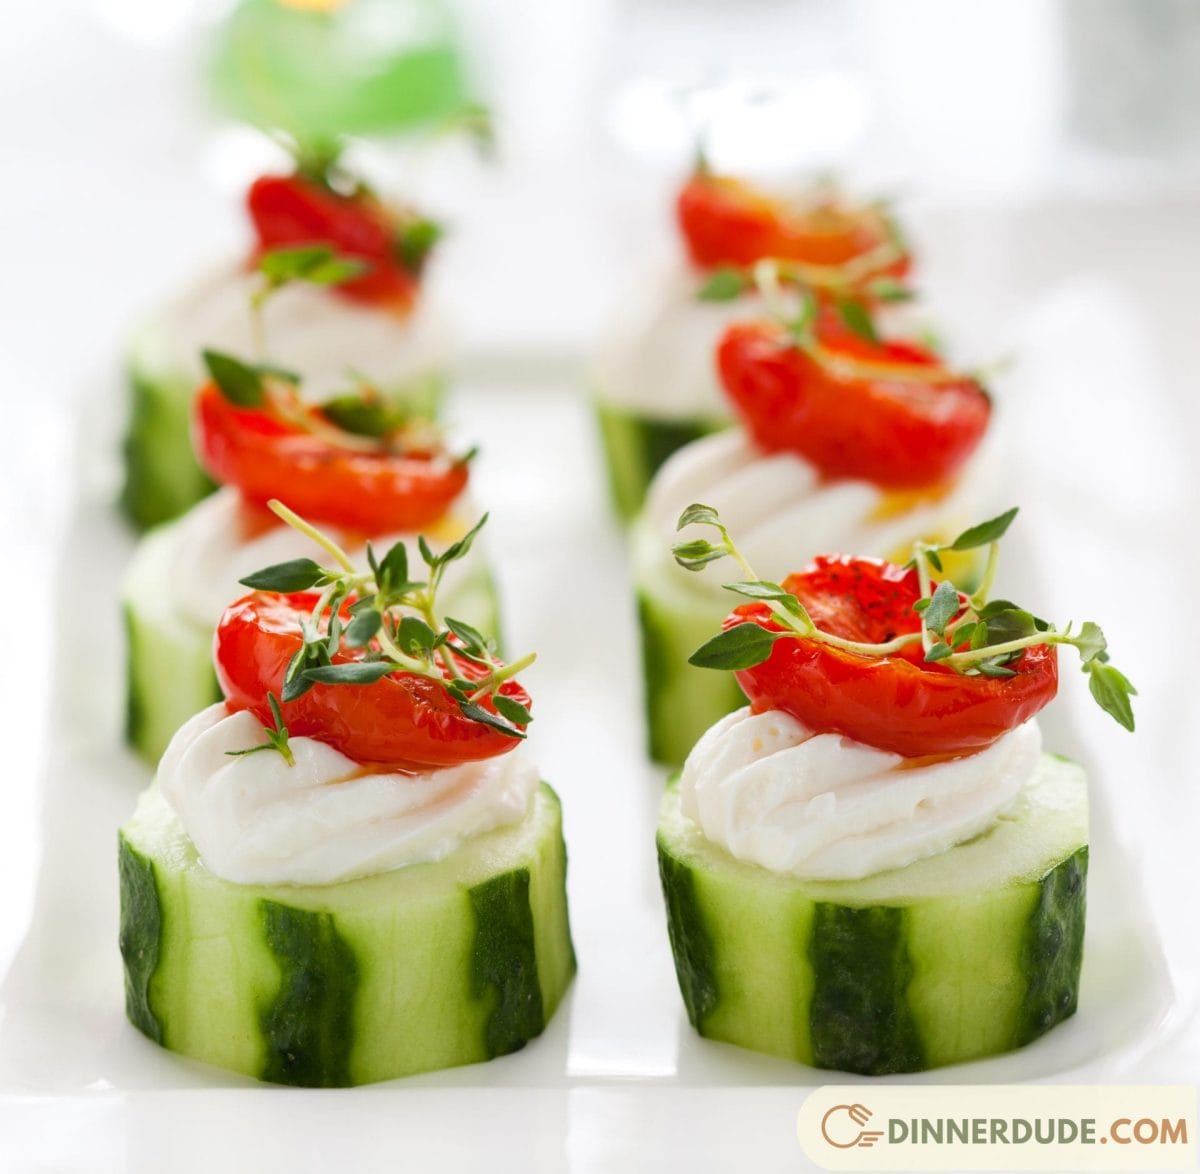 Cucumber flower with cream cheese and rasperries